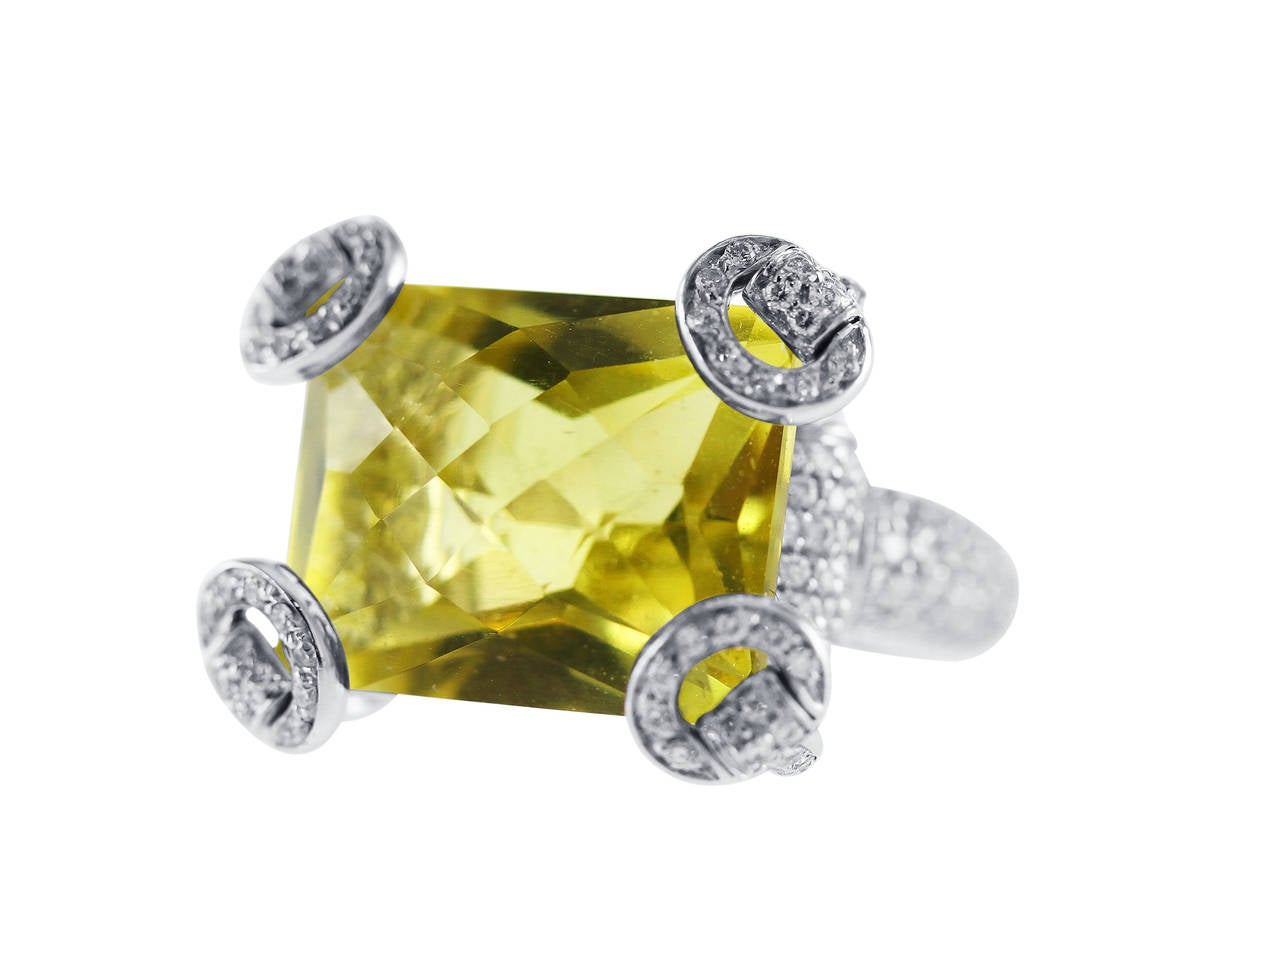 An 18 karat white gold, lemon citrine and diamond 'Horsebit' ring by Gucci, set in the center with a mixed-cut lemon citrine weighing approximately 12.00 carats, with stylized 'horsebit' prongs set throughout with 195 round diamonds weighing